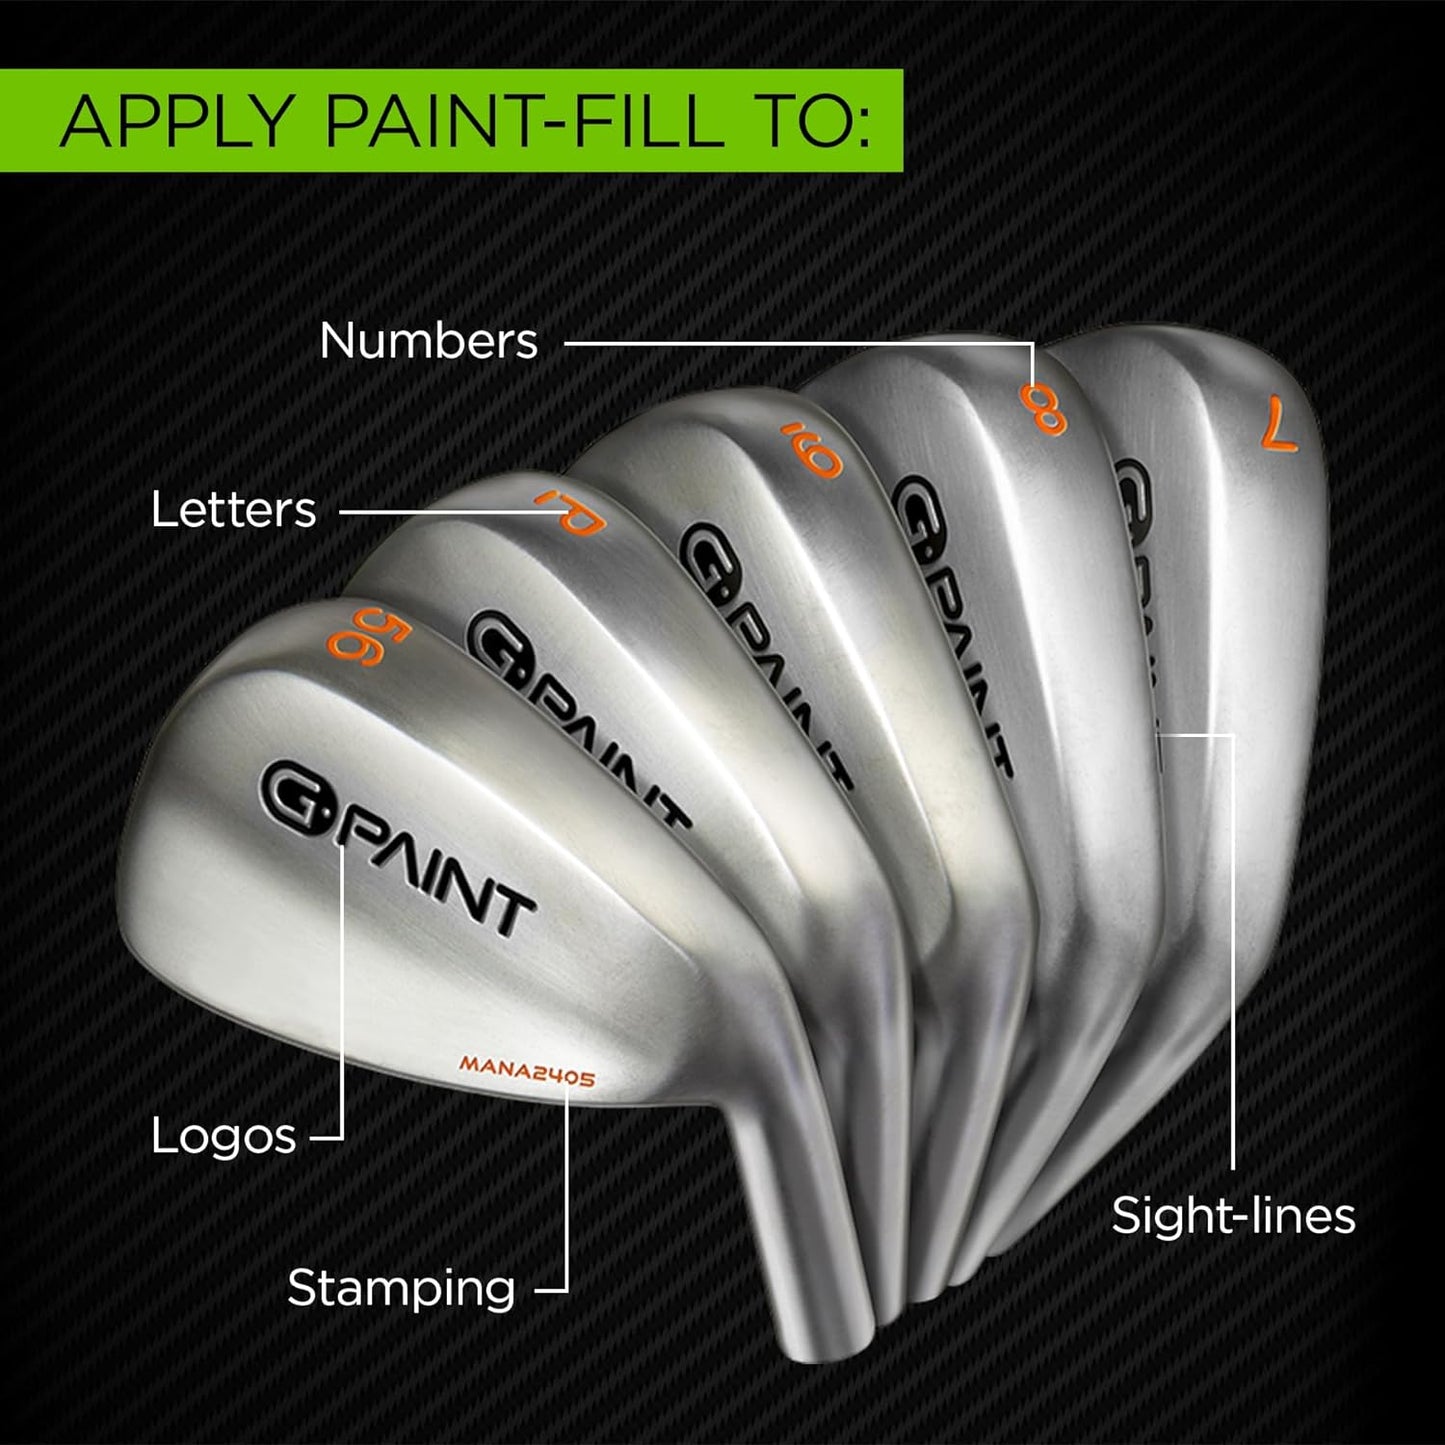 G-Paint Golf Club Paint - 4 Pack (Black/White/Red/Blue)